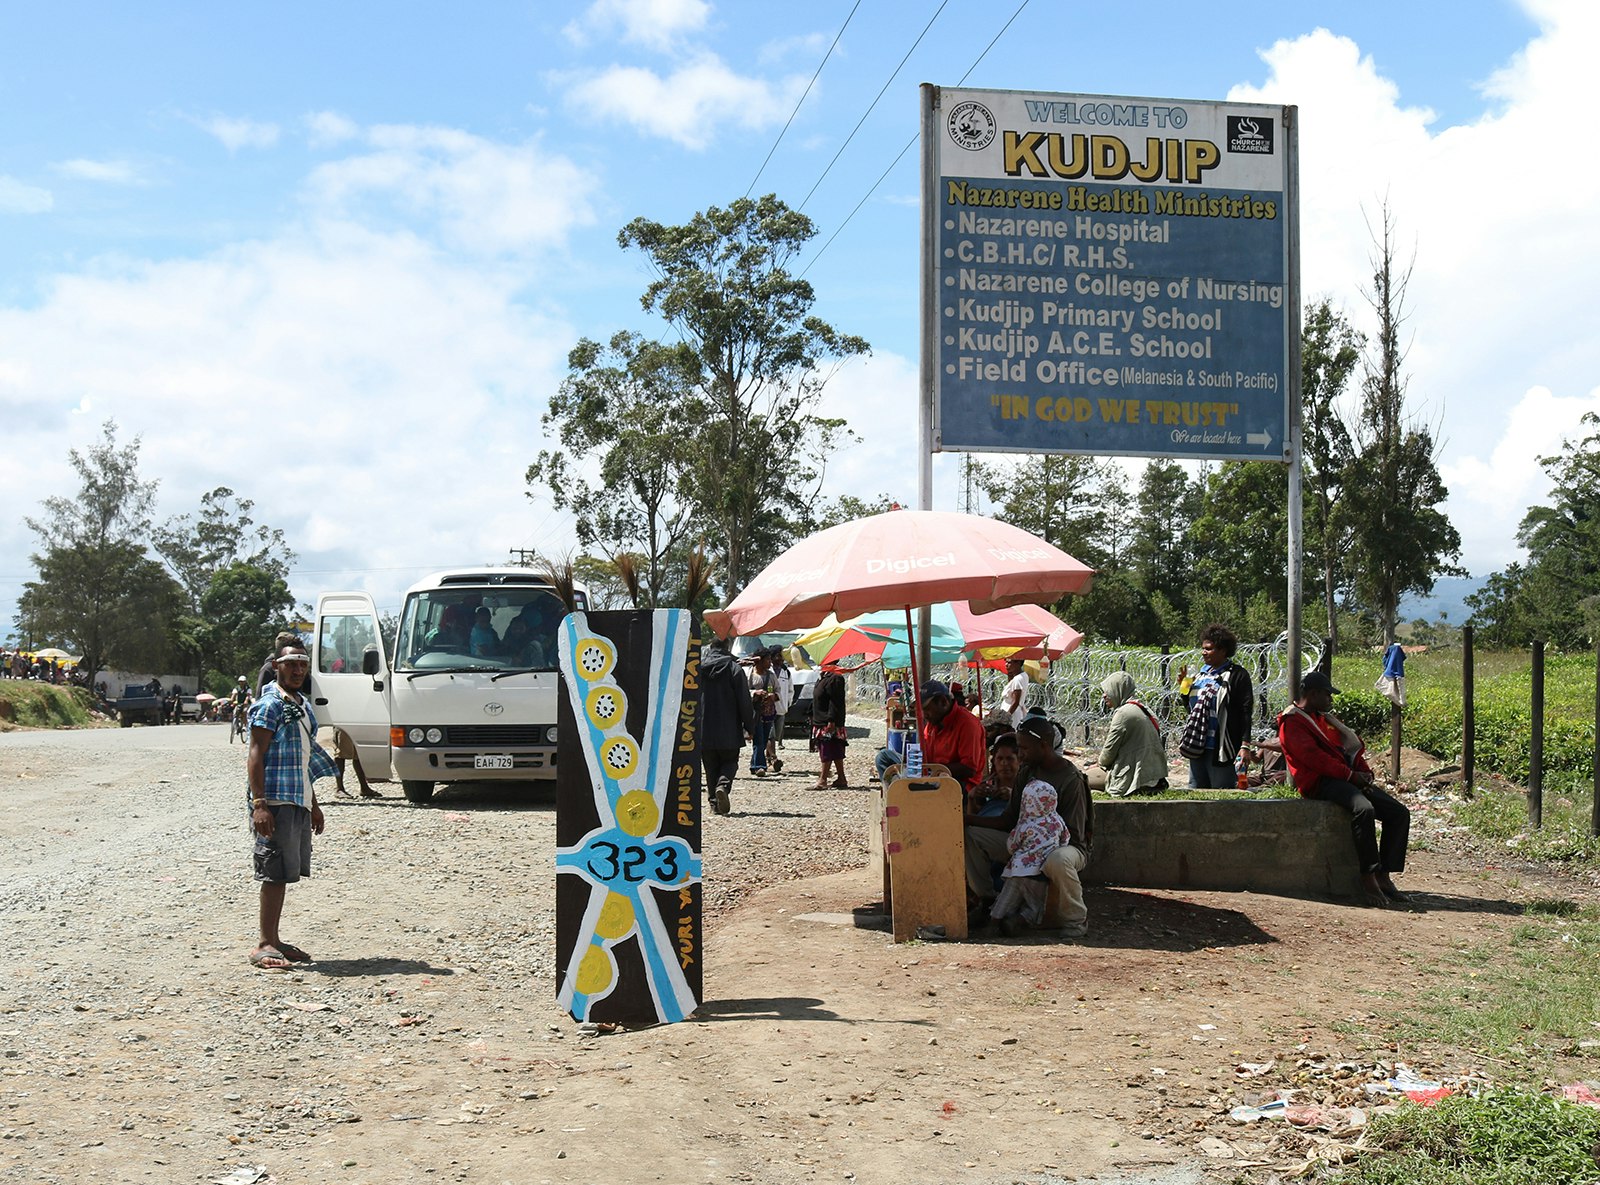 A dirt road in Papua New Guinea with a blue and yellow kuman (shield) planted in front of some roadside vendors set up under umbrellas. A sign above them reads, "Welcome to Kudjip... In God We Trust".